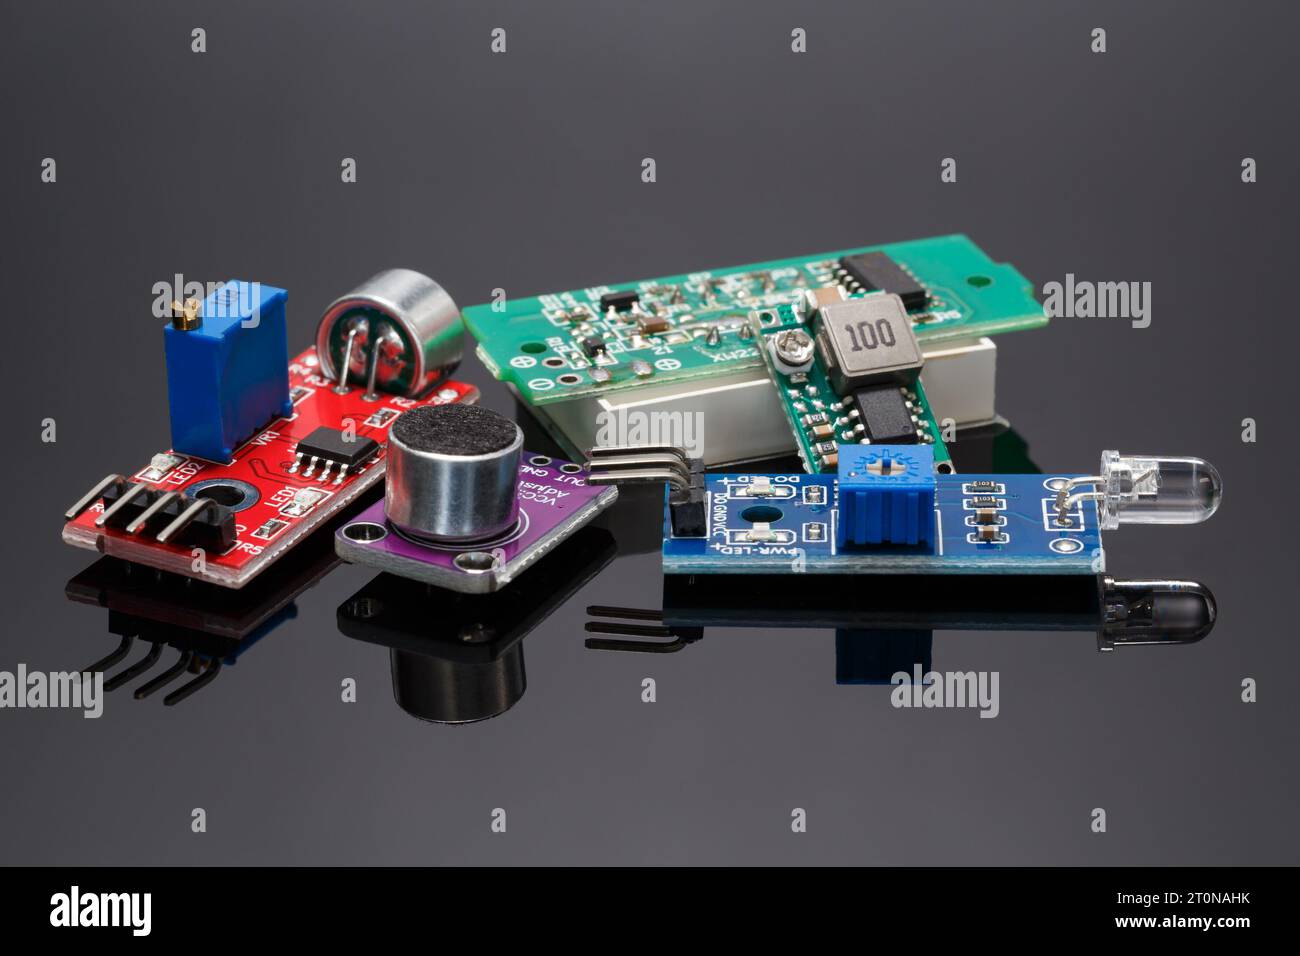 A set of various additional sensor modules for projects using Arduino. Close-up on a gray background. Stock Photo